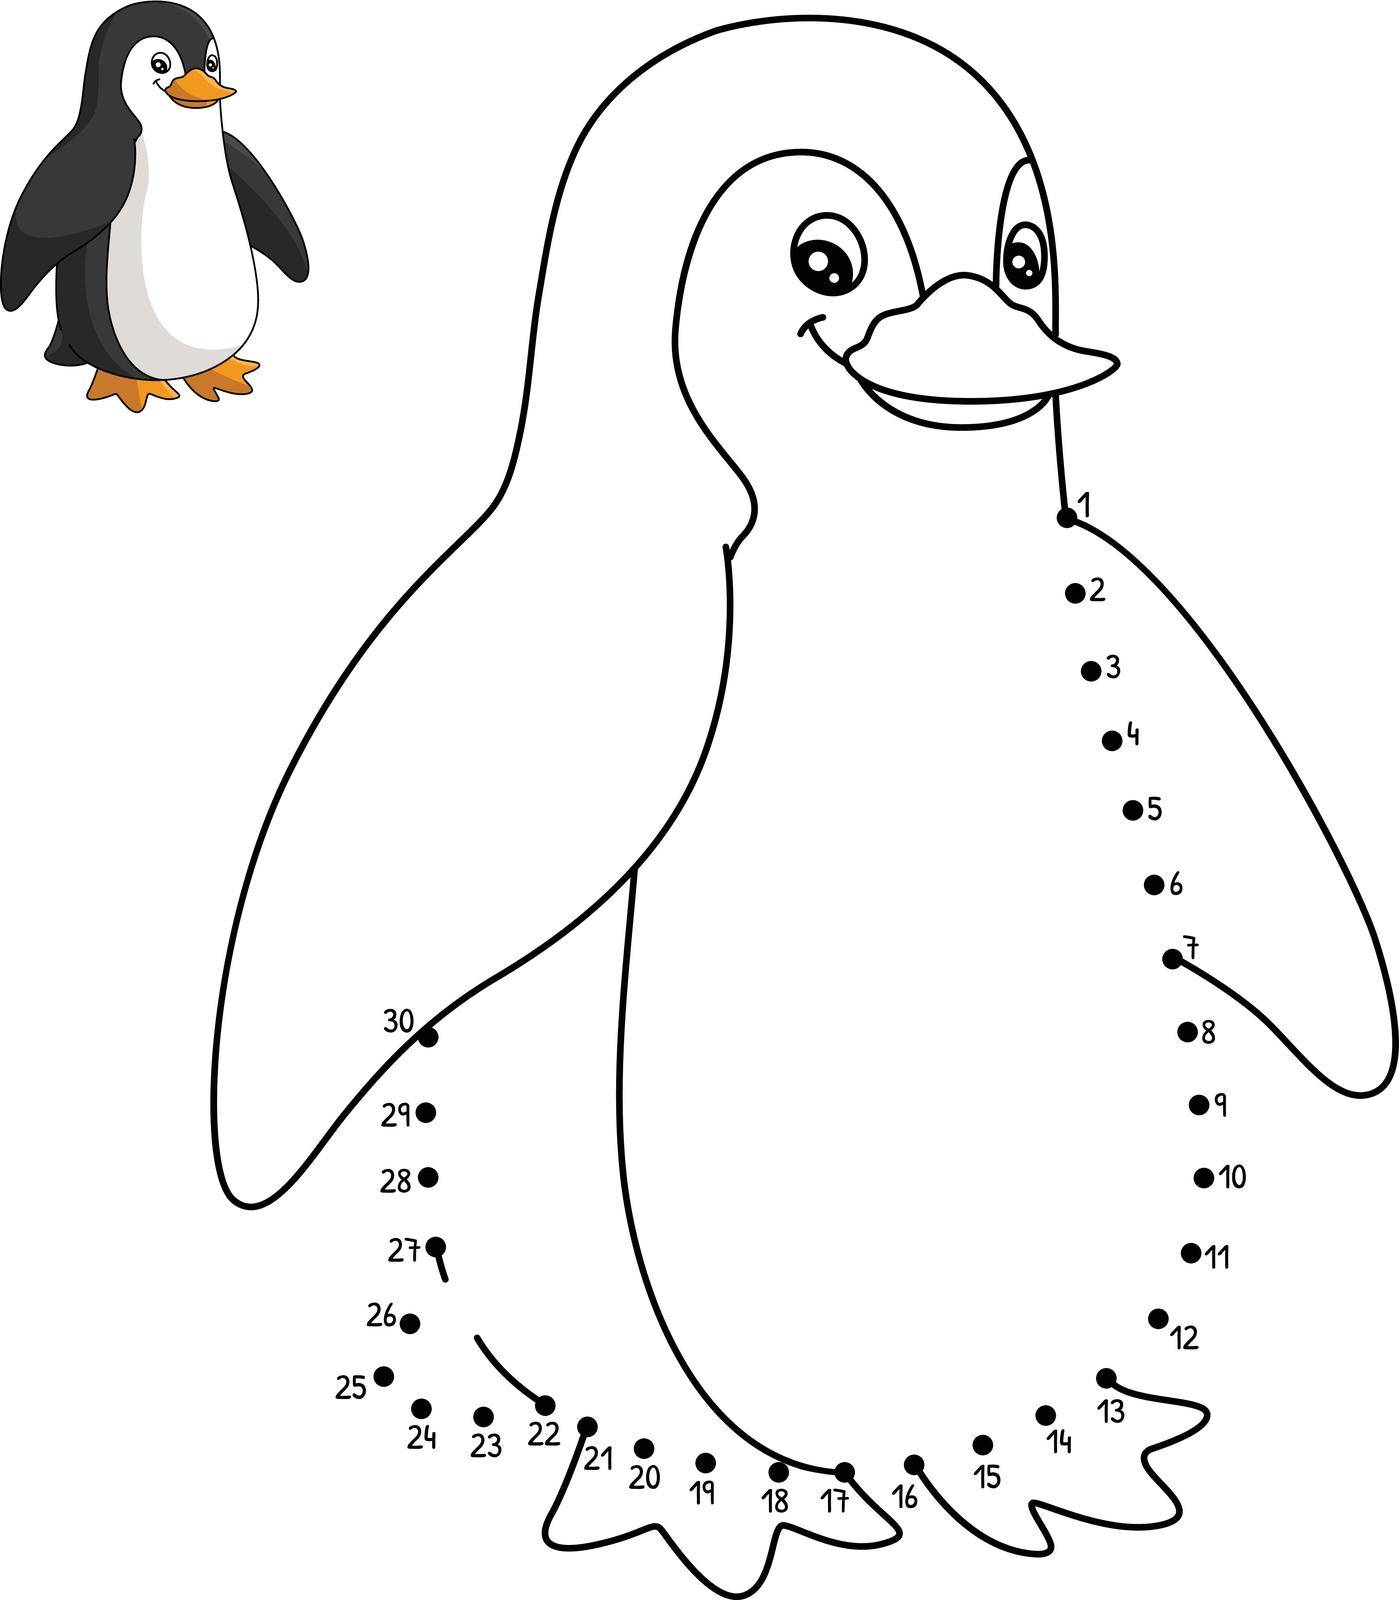 A cute and funny connect-the-dots coloring page of a Penguin. Provides hours of coloring fun for children. Color, this page is very easy. Suitable for little kids and toddlers.